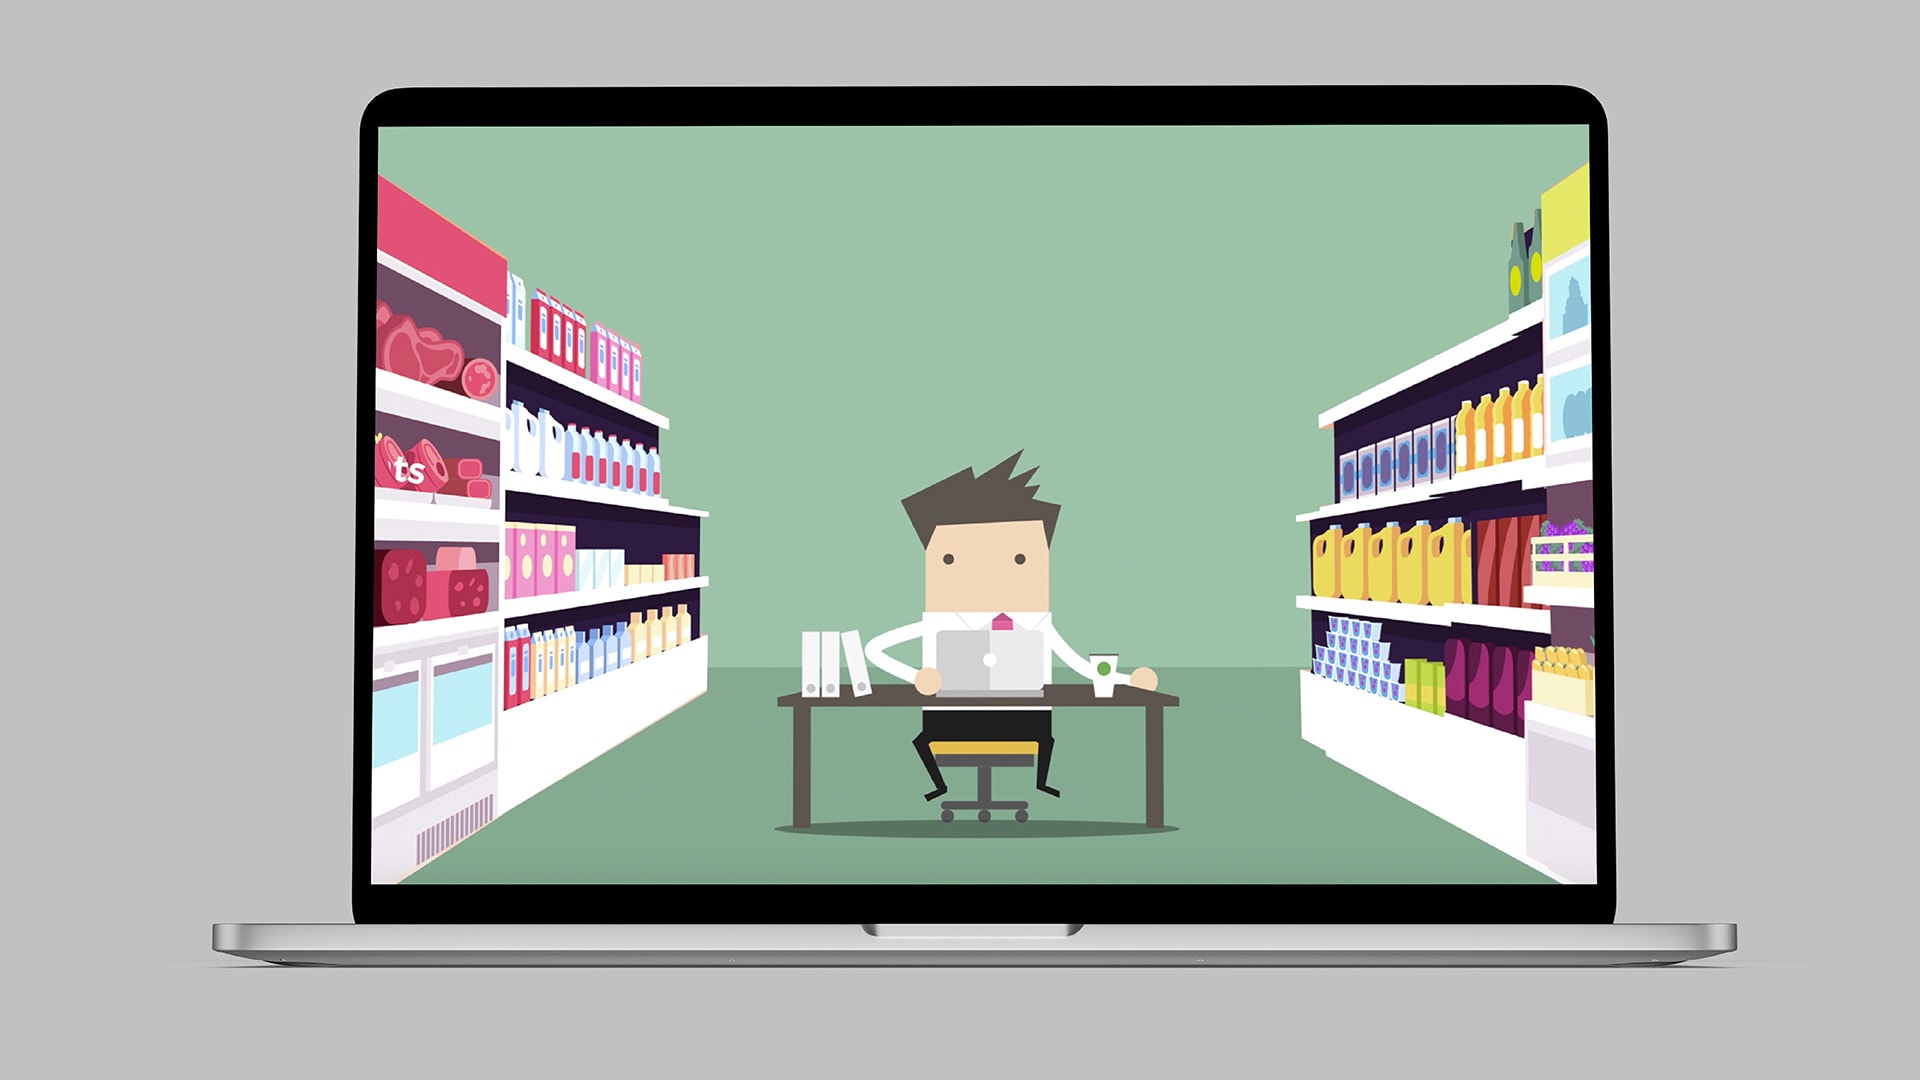 A laptop displaying the C-suite Pitch Pilot Brand Video Illustration showing a man sitting at a desk in a supermarket aisle